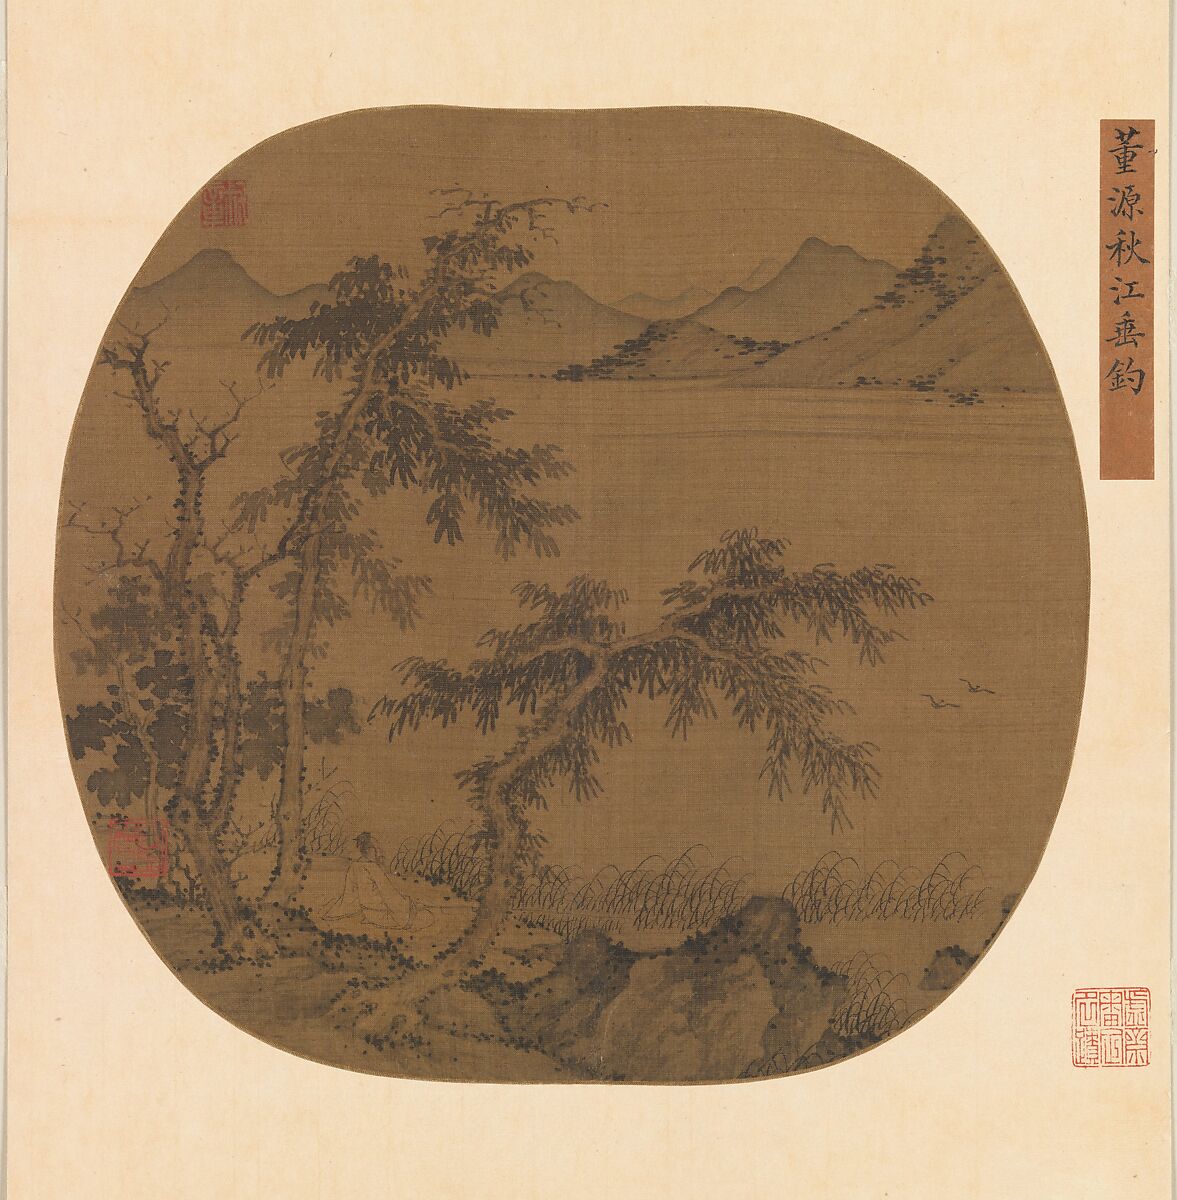 Angling in the Autumn River, Sheng Zhu (Chinese, active late 14th century), Fan mounted as an album leaf; ink and color on silk, China 